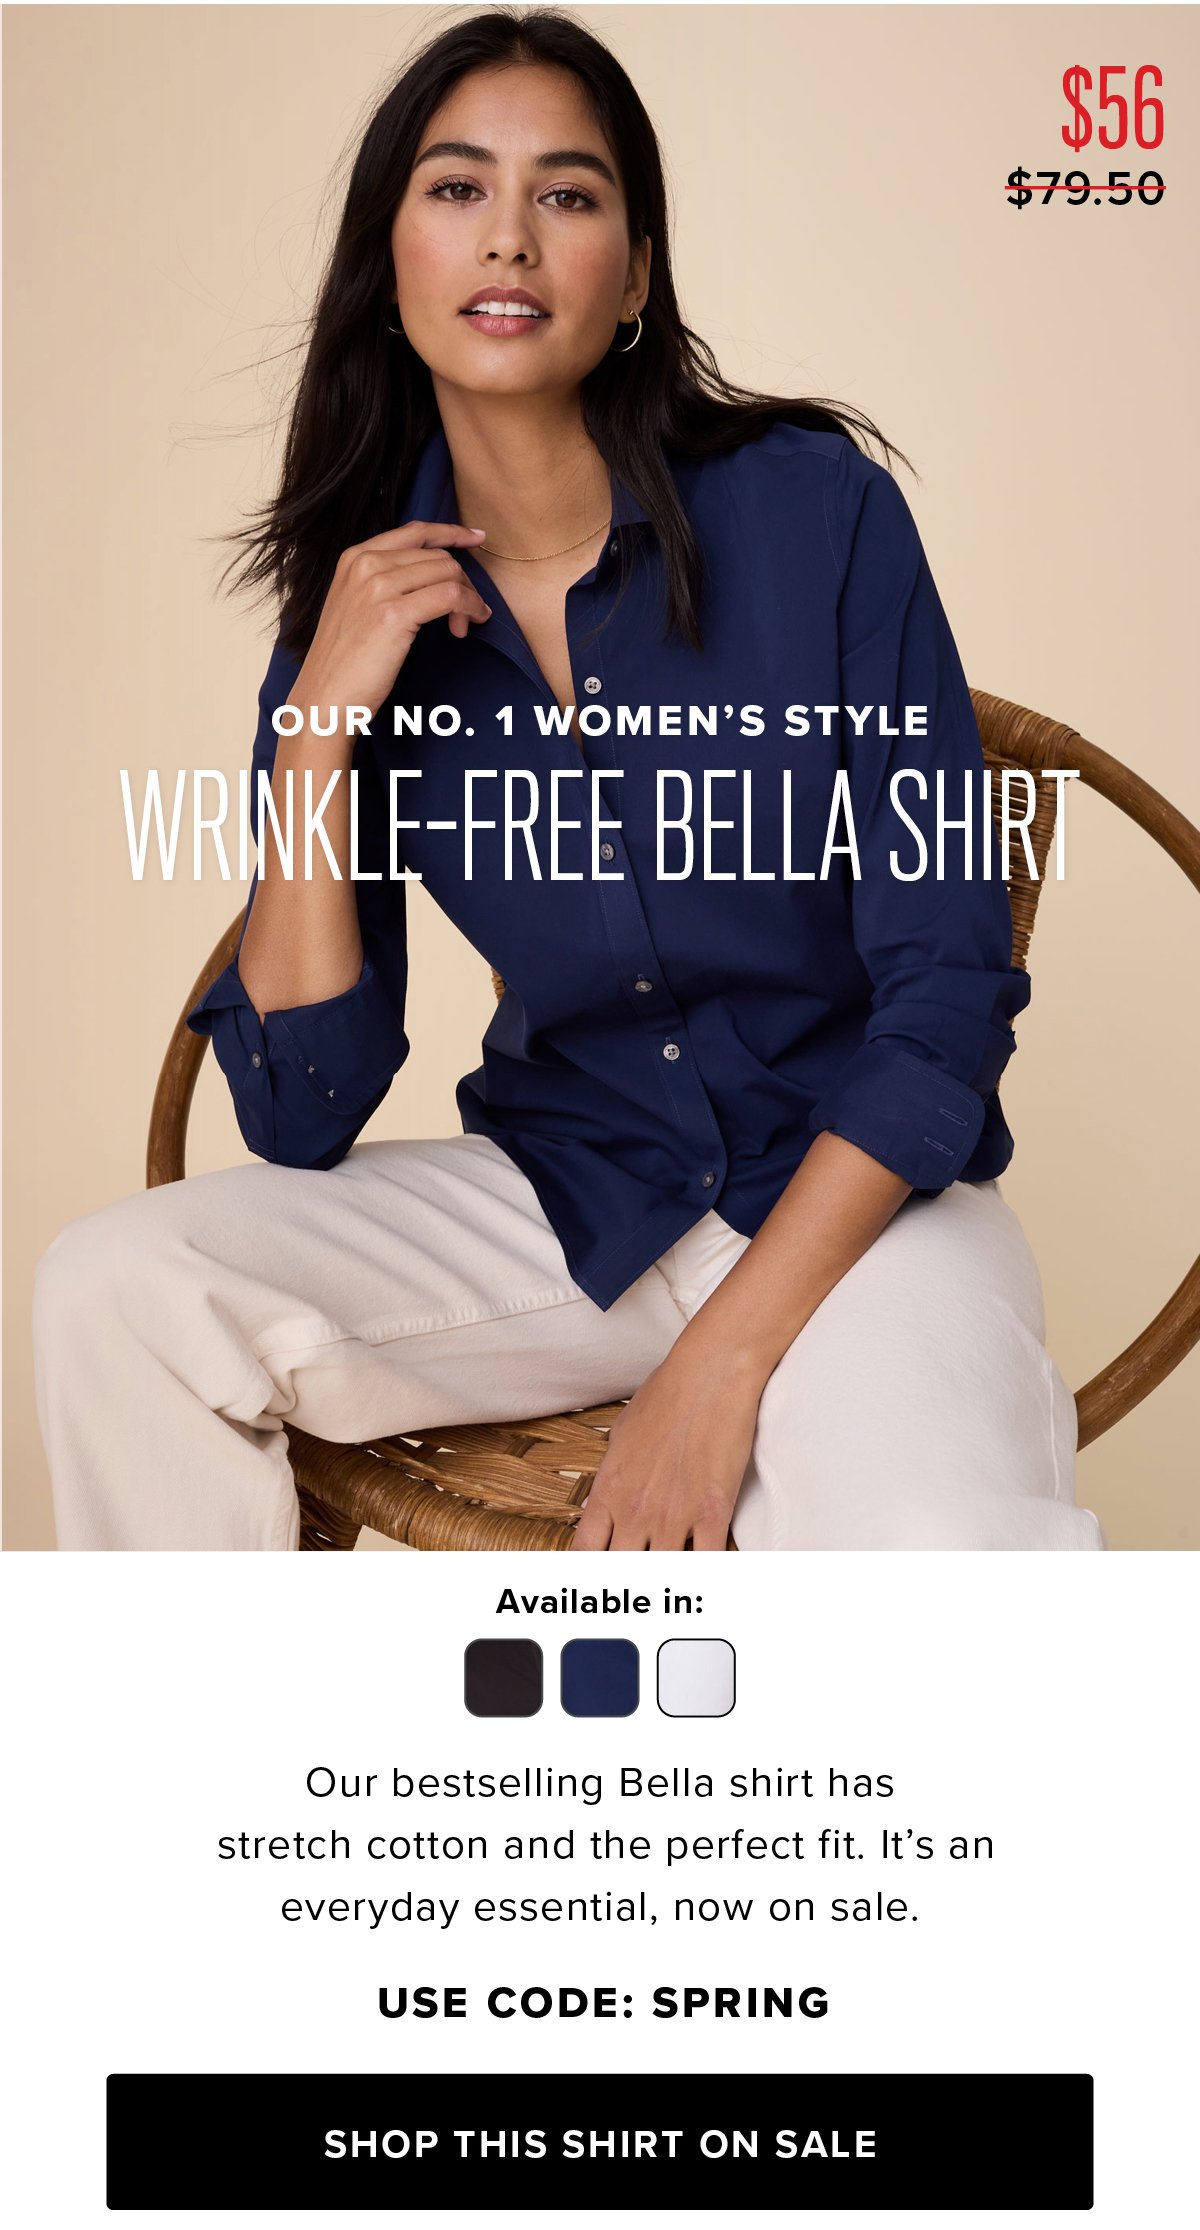 Shop Our No. 1 Women's Style The Wrinkle-Free Bella Shirt